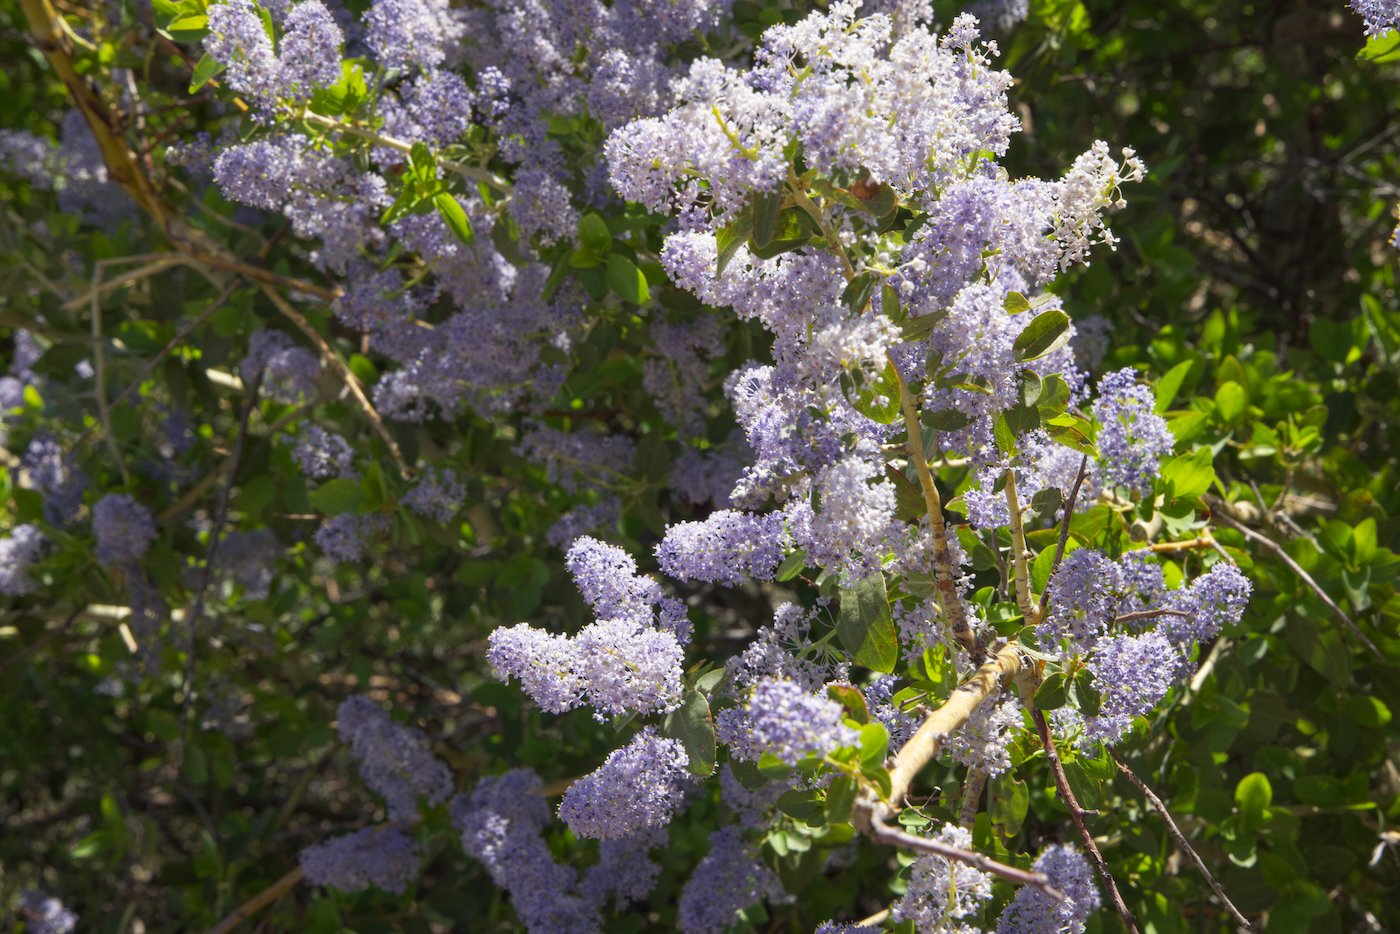 Ceanothus blossoms - scent of honey in the warm air.